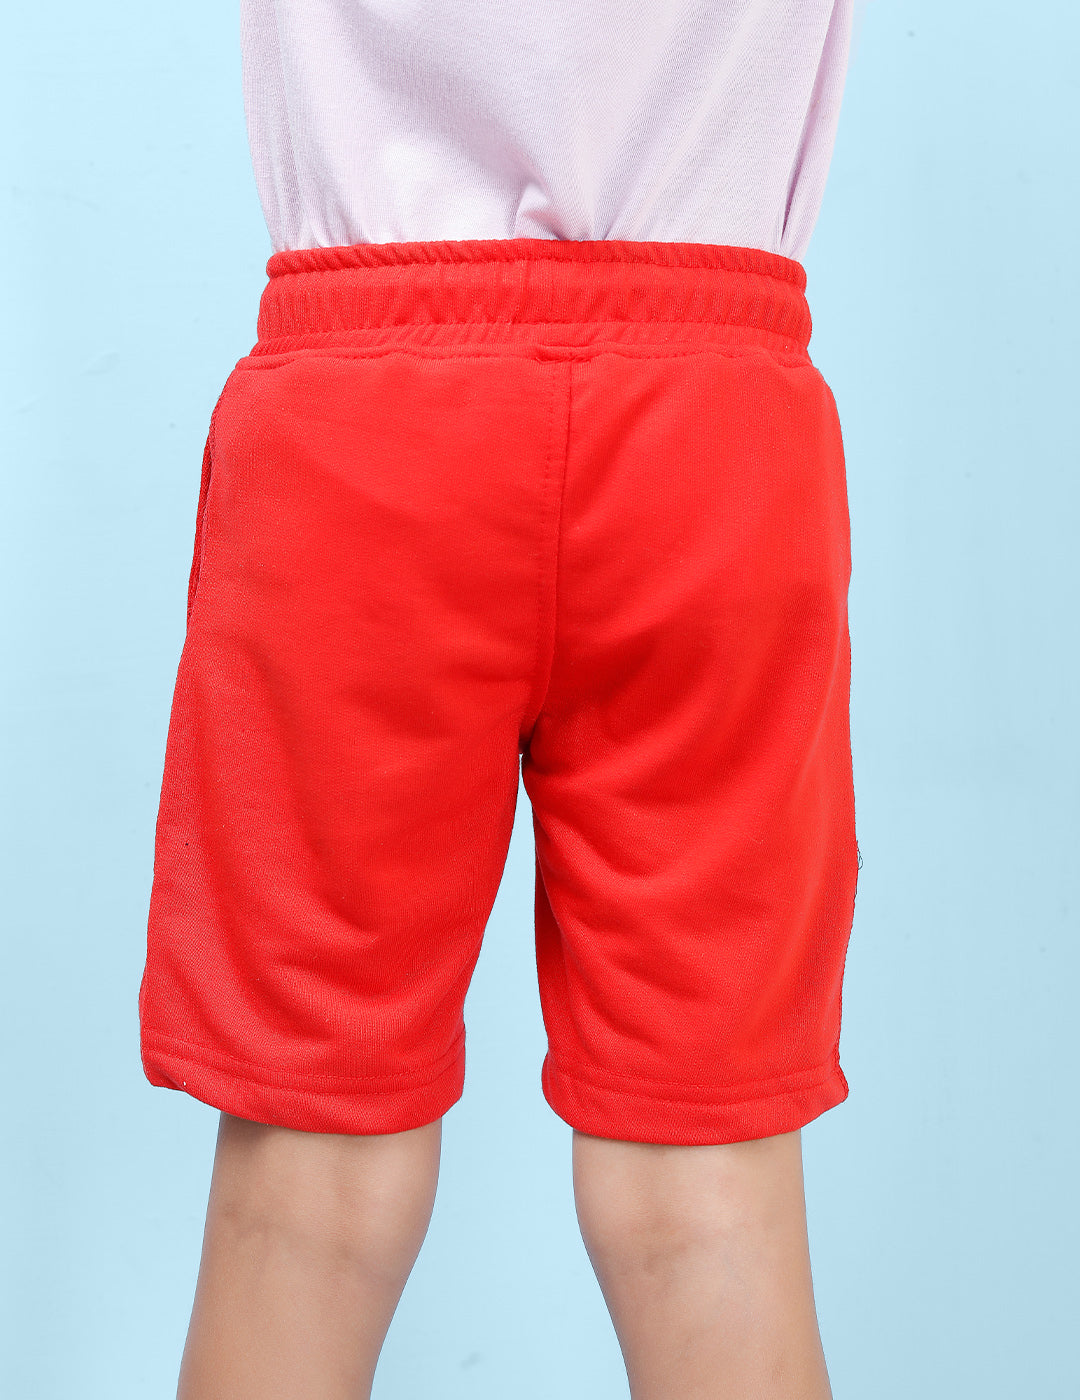 Nusyl colourful lines  Printed Red Boys Shorts